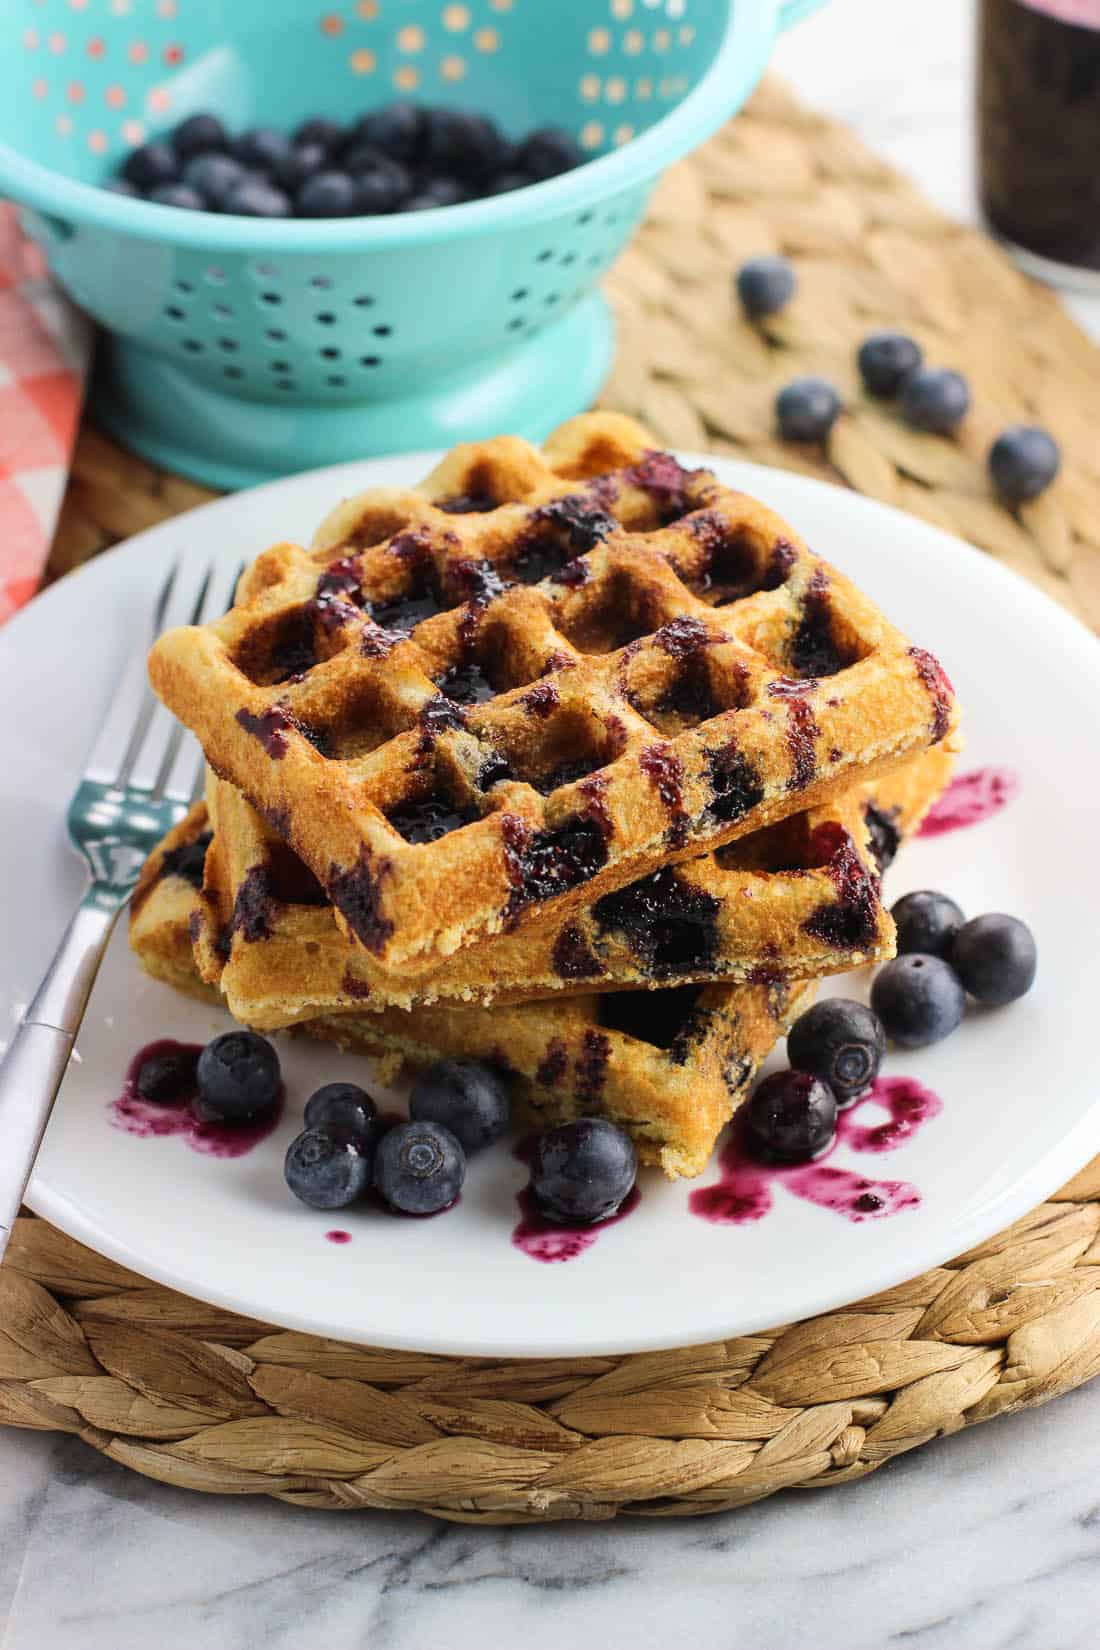 A stack of three blueberry cornbread waffles drizzled with syrup on a plate with a fork.